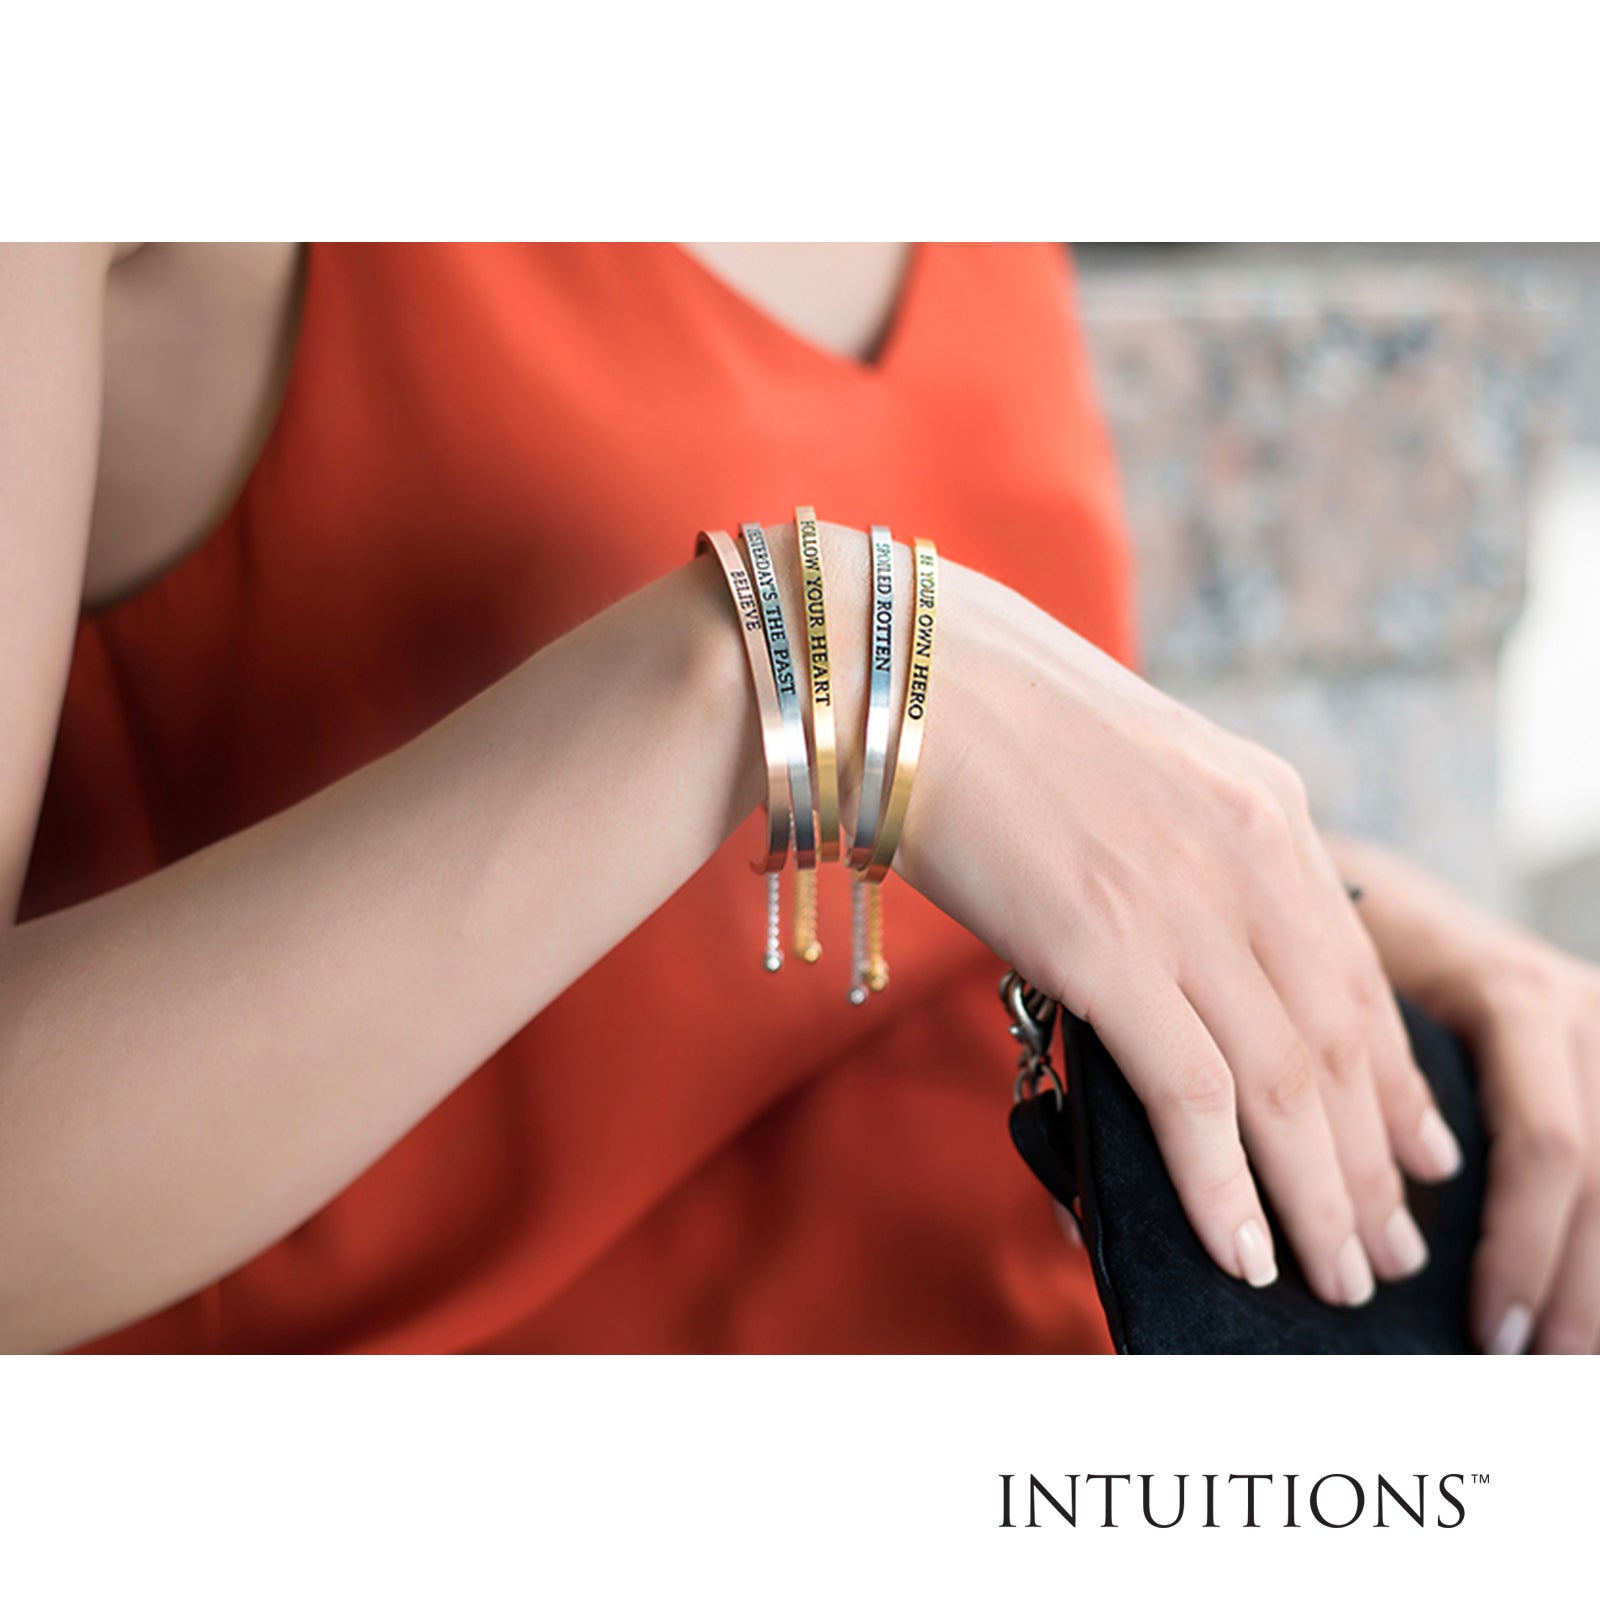 Intuitions Stainless Steel LIFE IS BEAUTIFUL Diamond Accent Cuff Bangle Bracelet fine designer jewelry for men and women